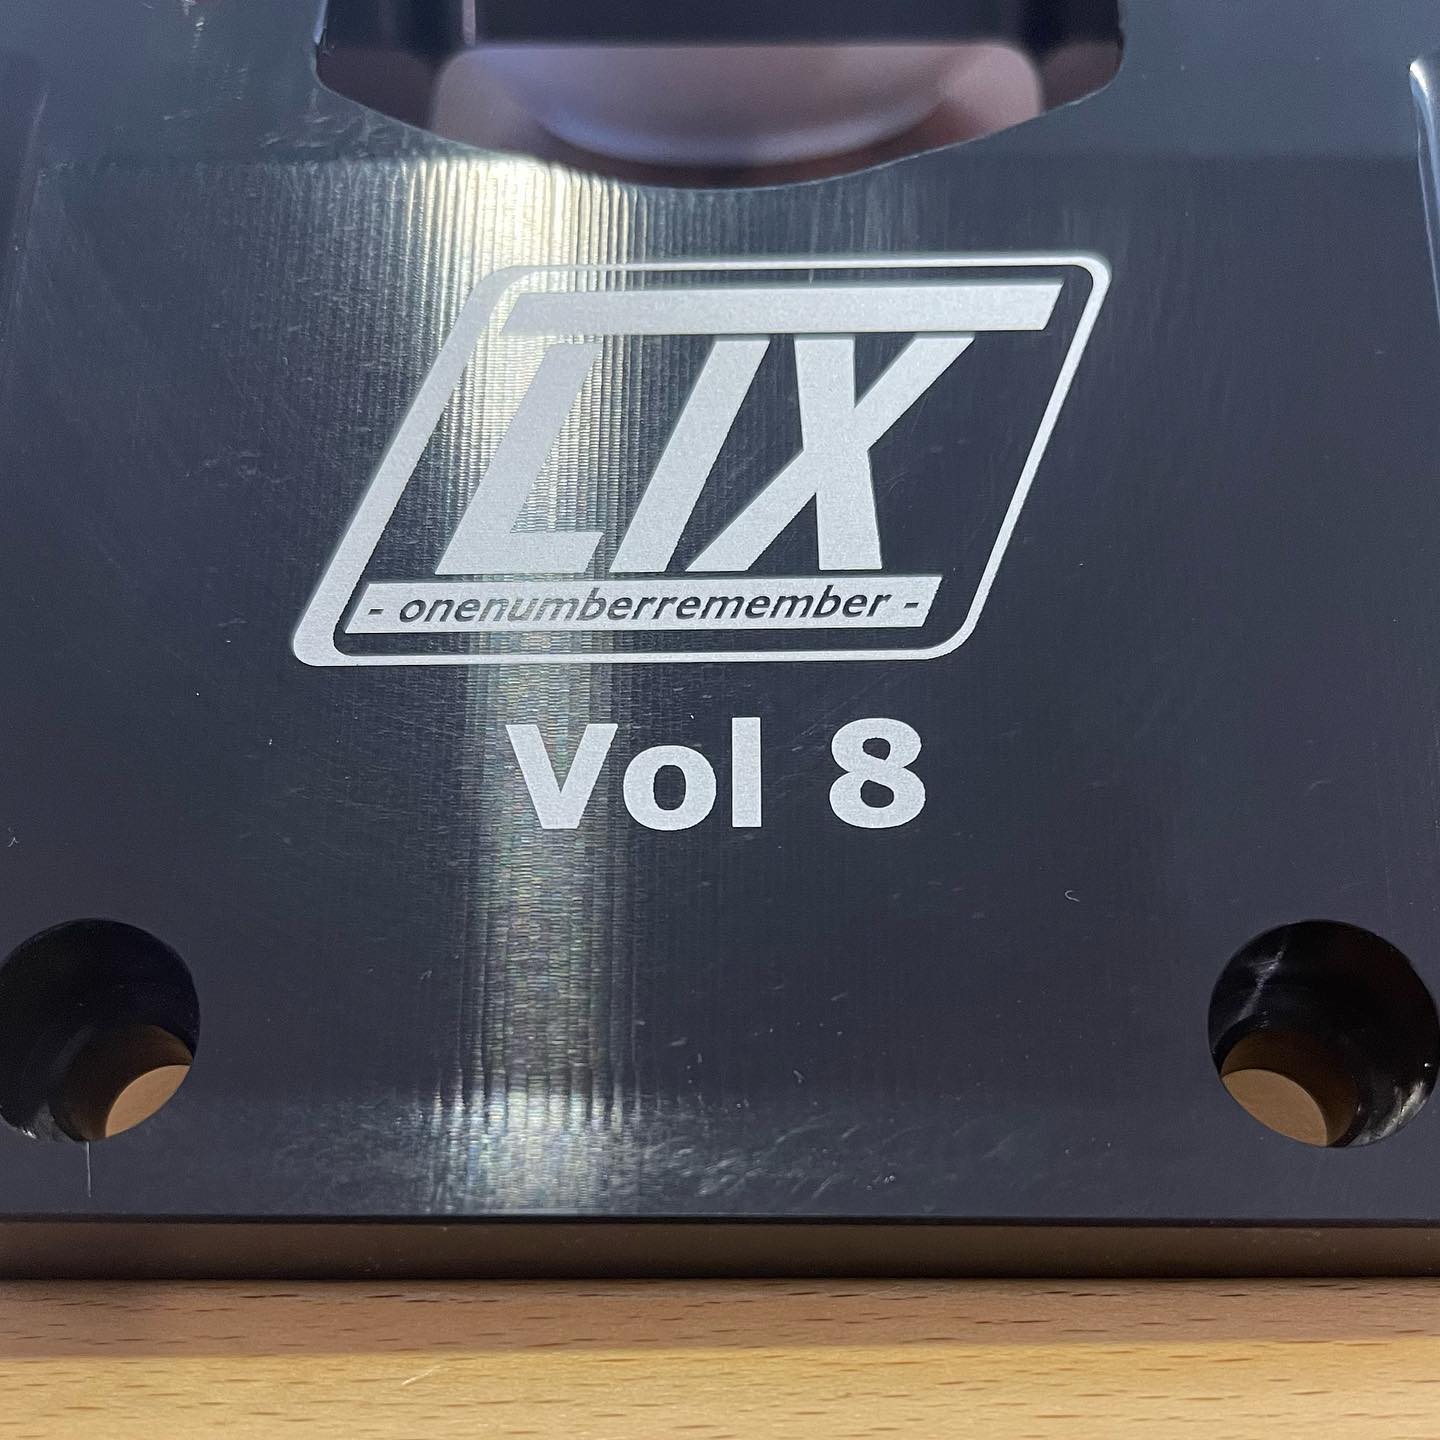 Lix team has arrived to Nordic Championship racesite in Sweden.
With our intake grate vol 8, we have accomplished amazing handling change for raceski and we are proud to give all the Nordic racers chance to test and buy it.
Feel free to come ask for testing the best intake grate for Sx-r 1500. 
It is tested in many races and worked for many different setup skis. This is one of a kind and makes your ski handling  incredible.
The price for intake grate is 700€.
We also have black handlepole in stock.